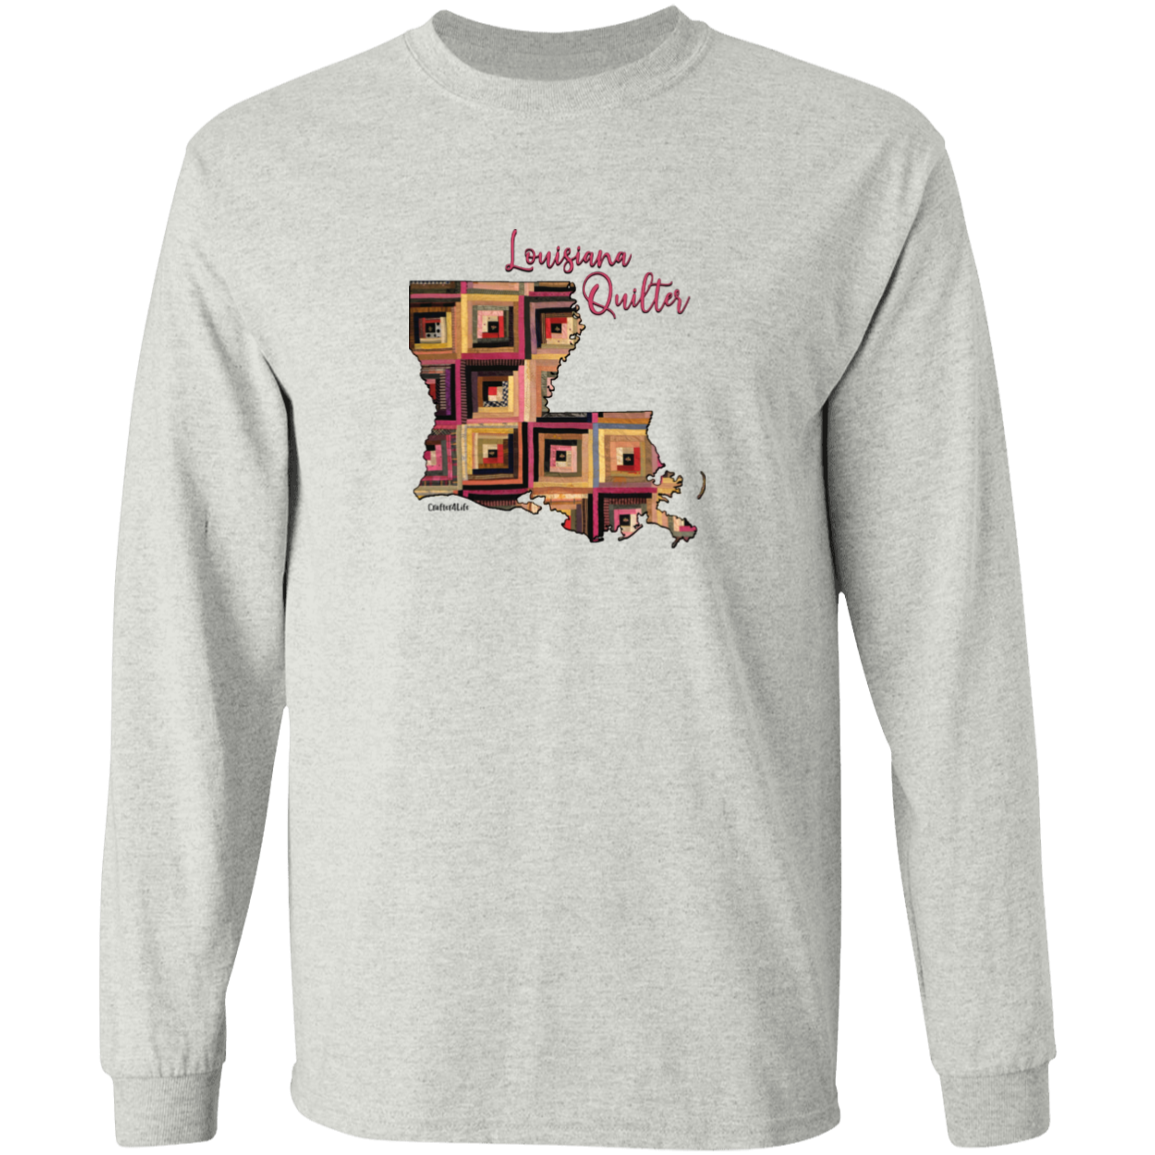 Louisiana Quilter Long Sleeve T-Shirt, Gift for Quilting Friends and Family